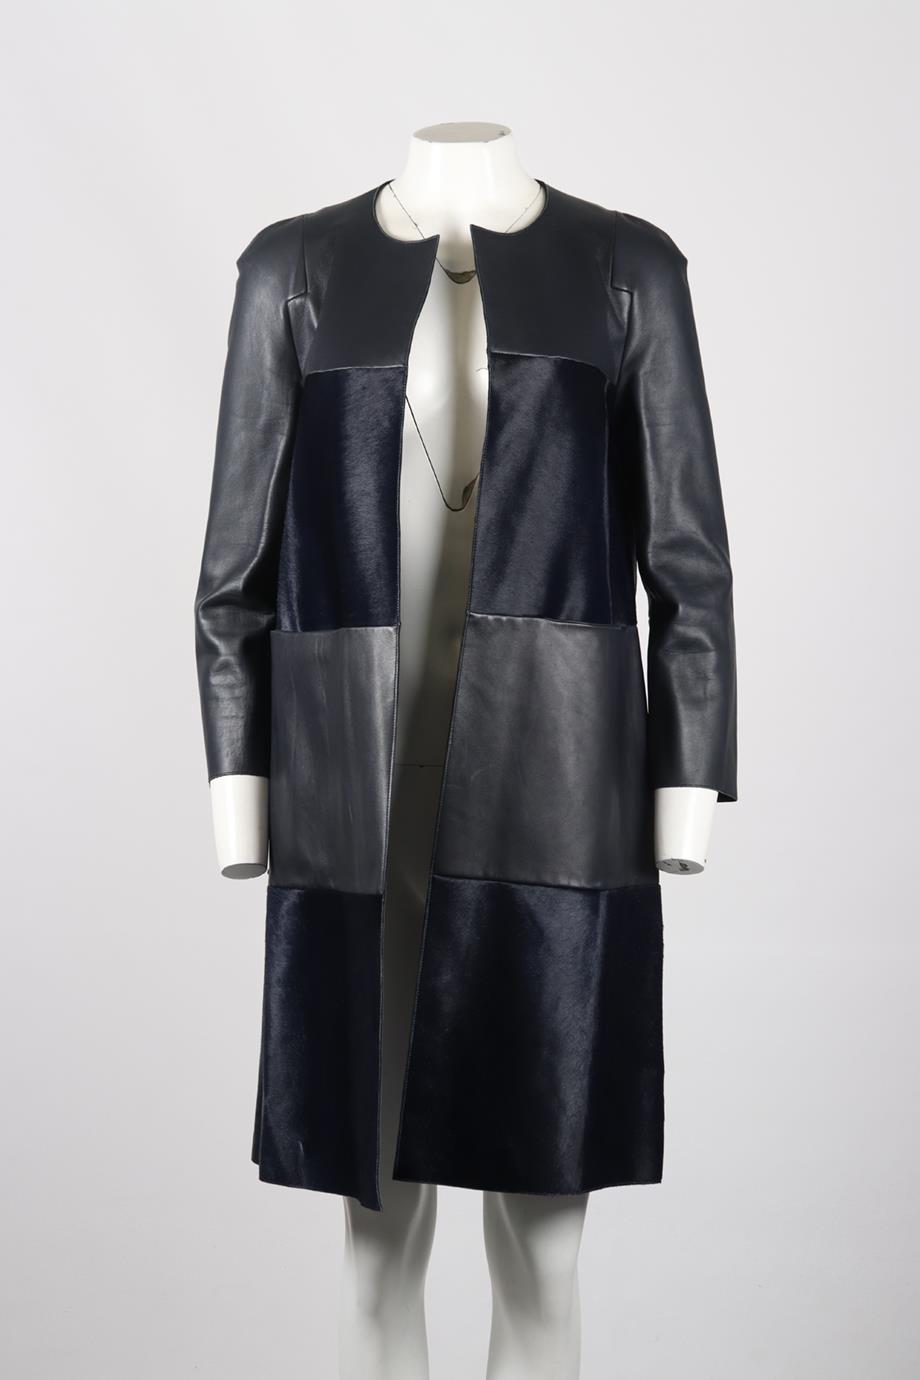 MULBERRY CALF HAIR AND LEATHER COAT UK 8